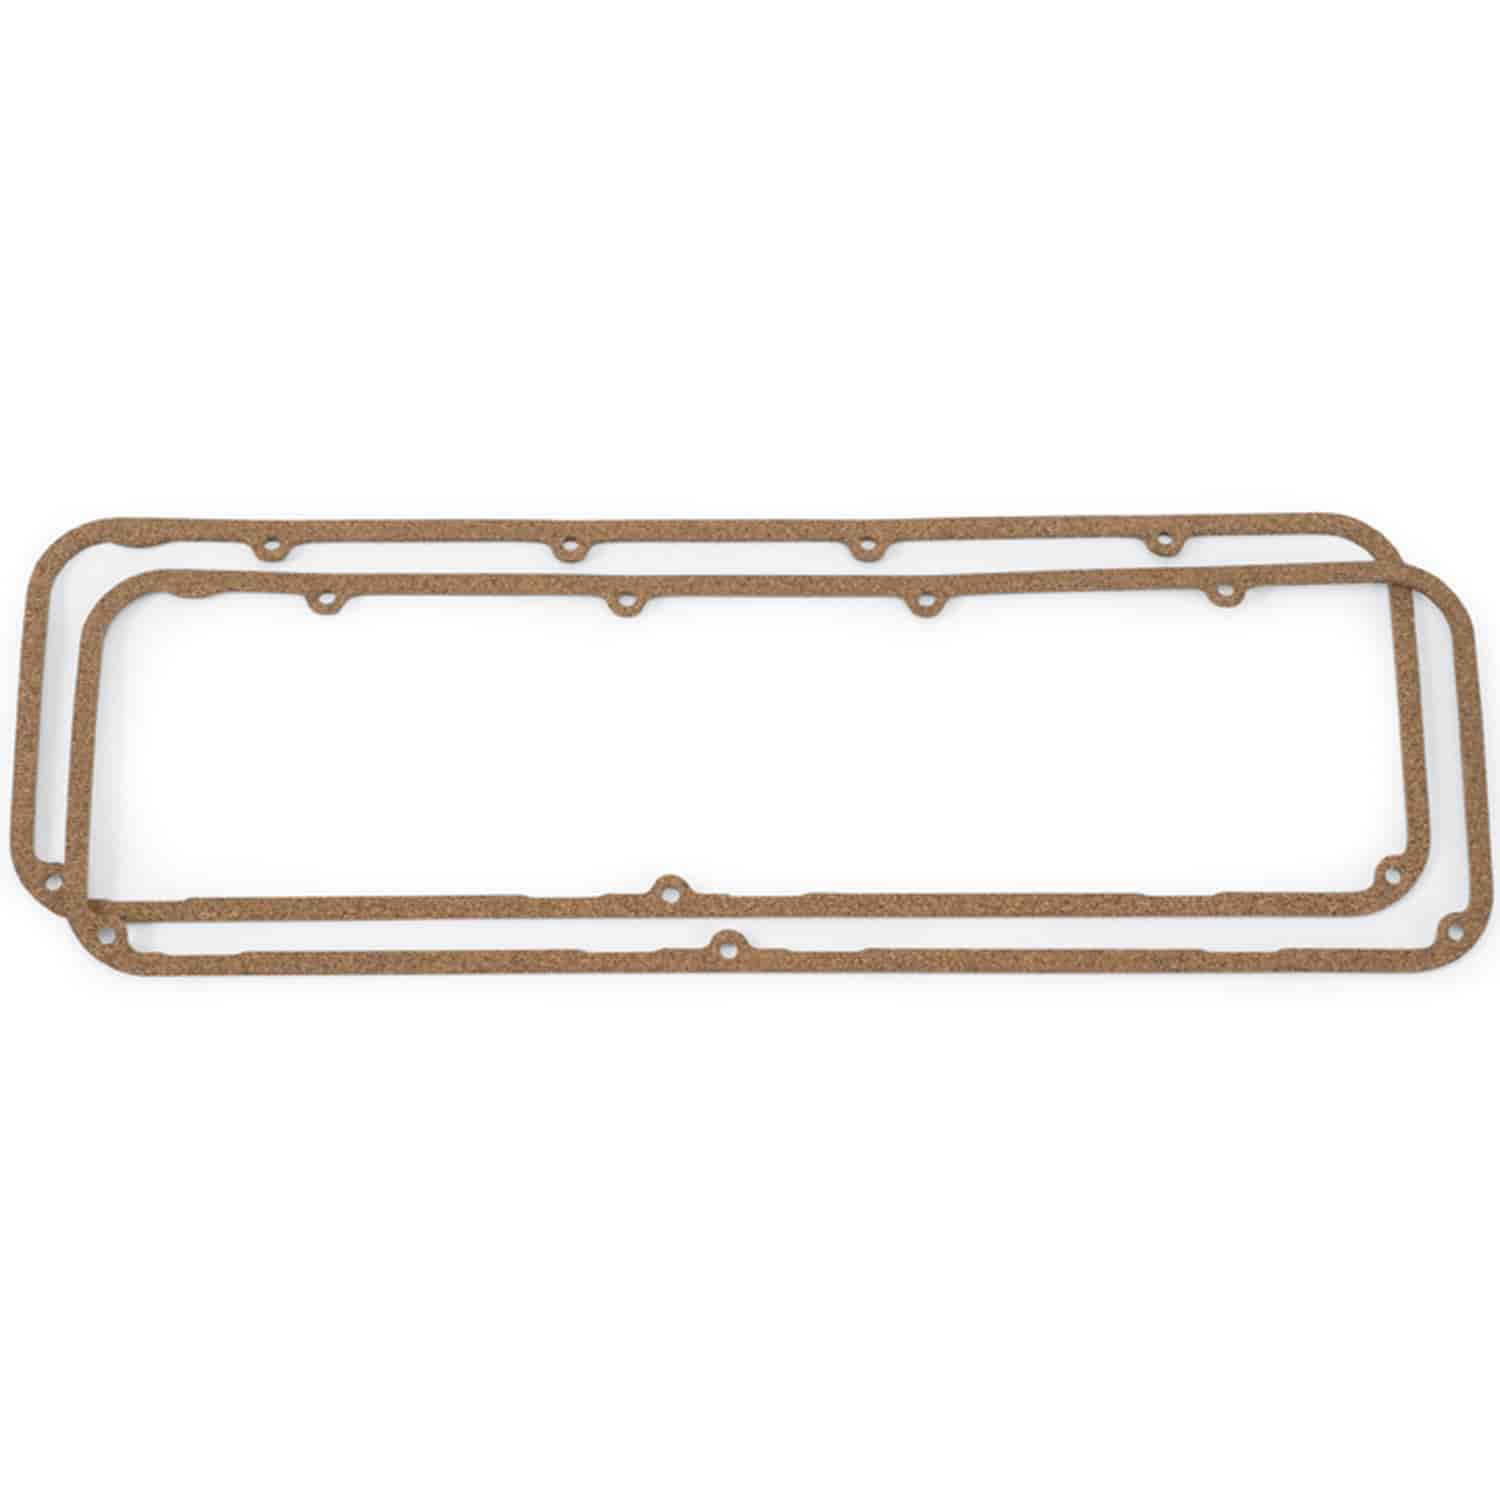 Valve Cover Gaskets for Big Block Chevy with BV3 Heads